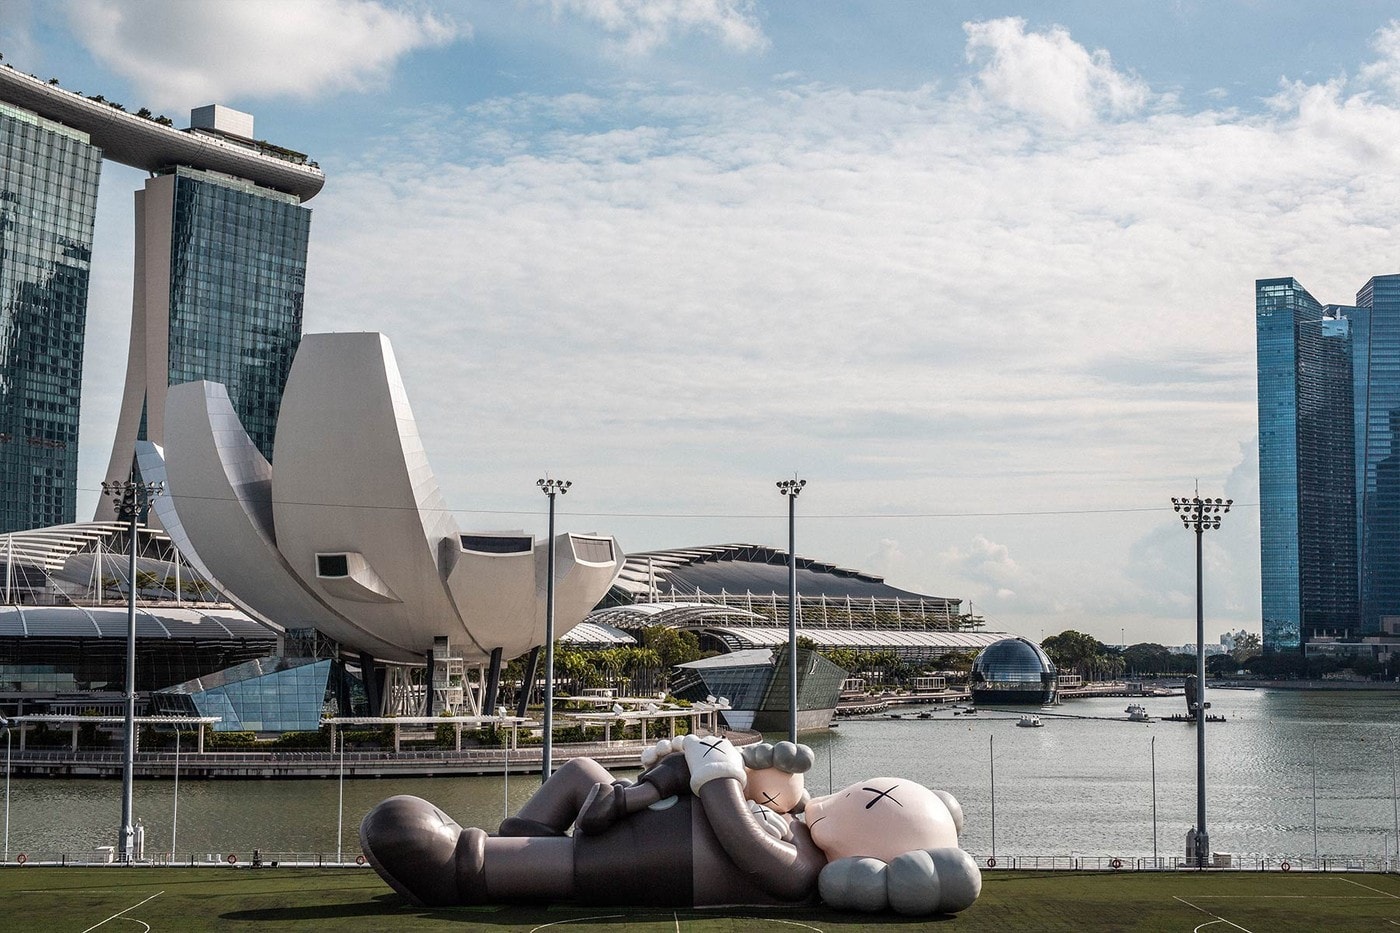 kaws holiday singapore ordered to stop the Ryan foundation court order